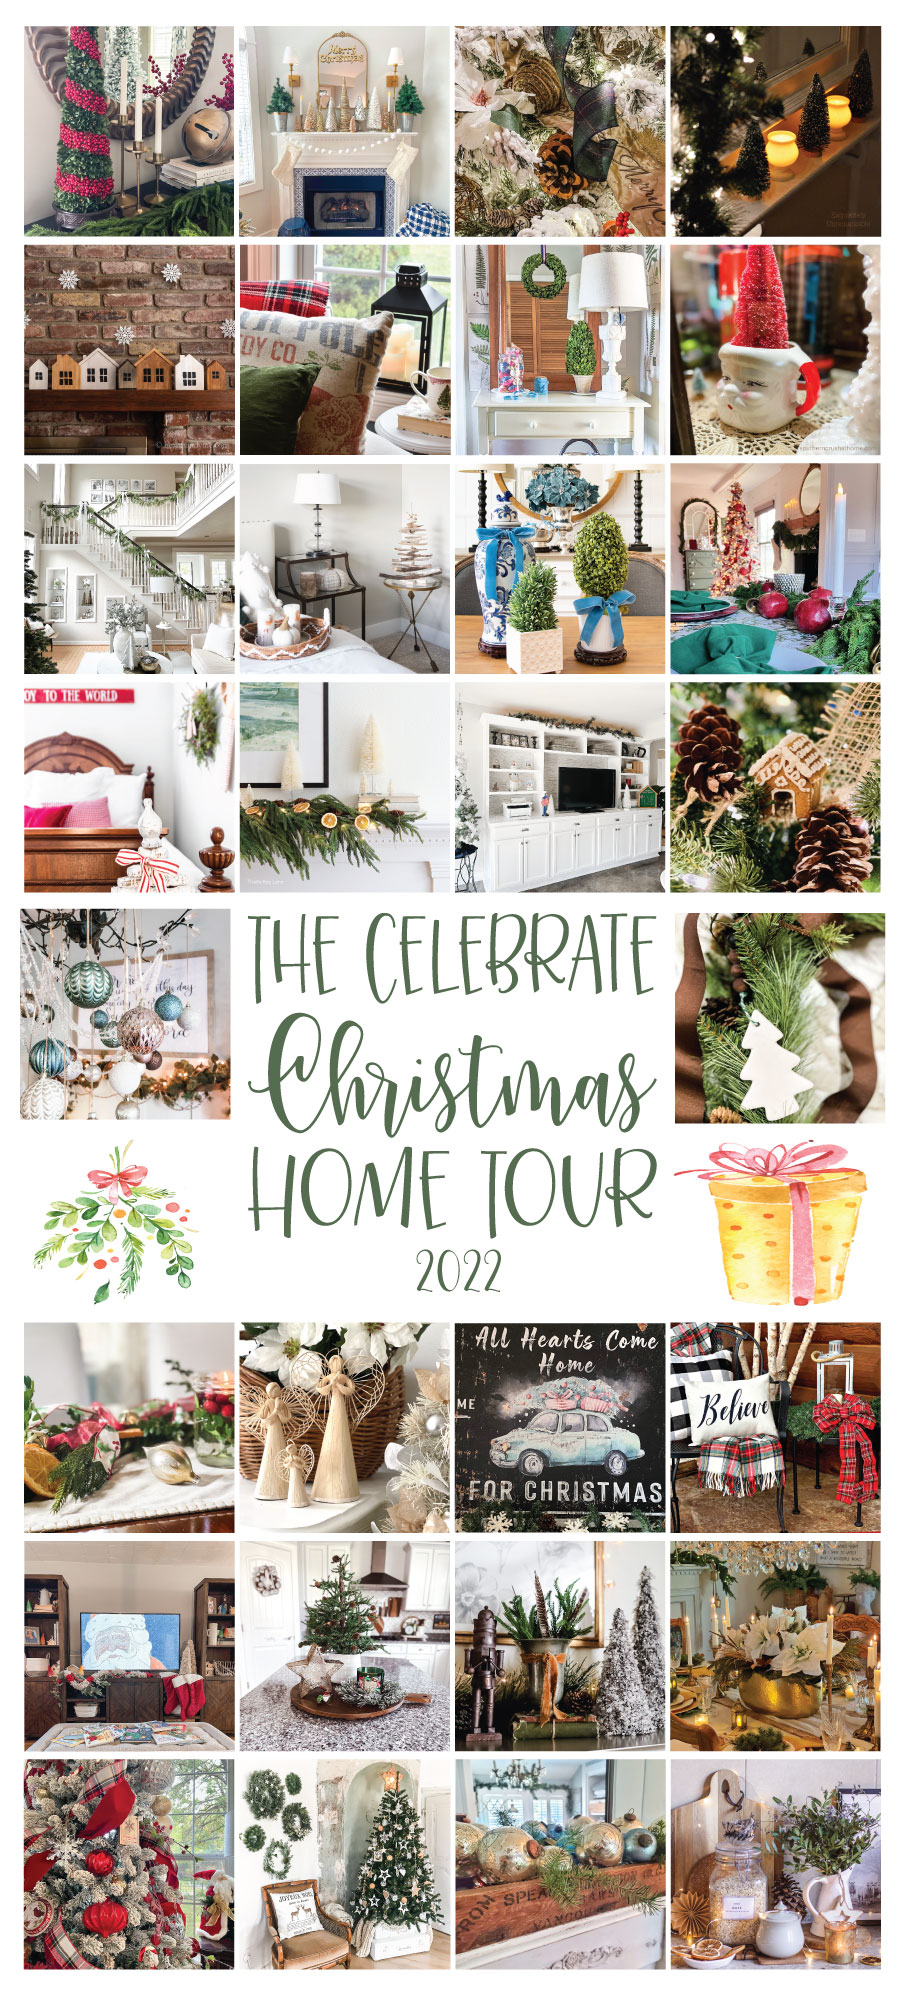 Collage of Christmas blog hop decorations.